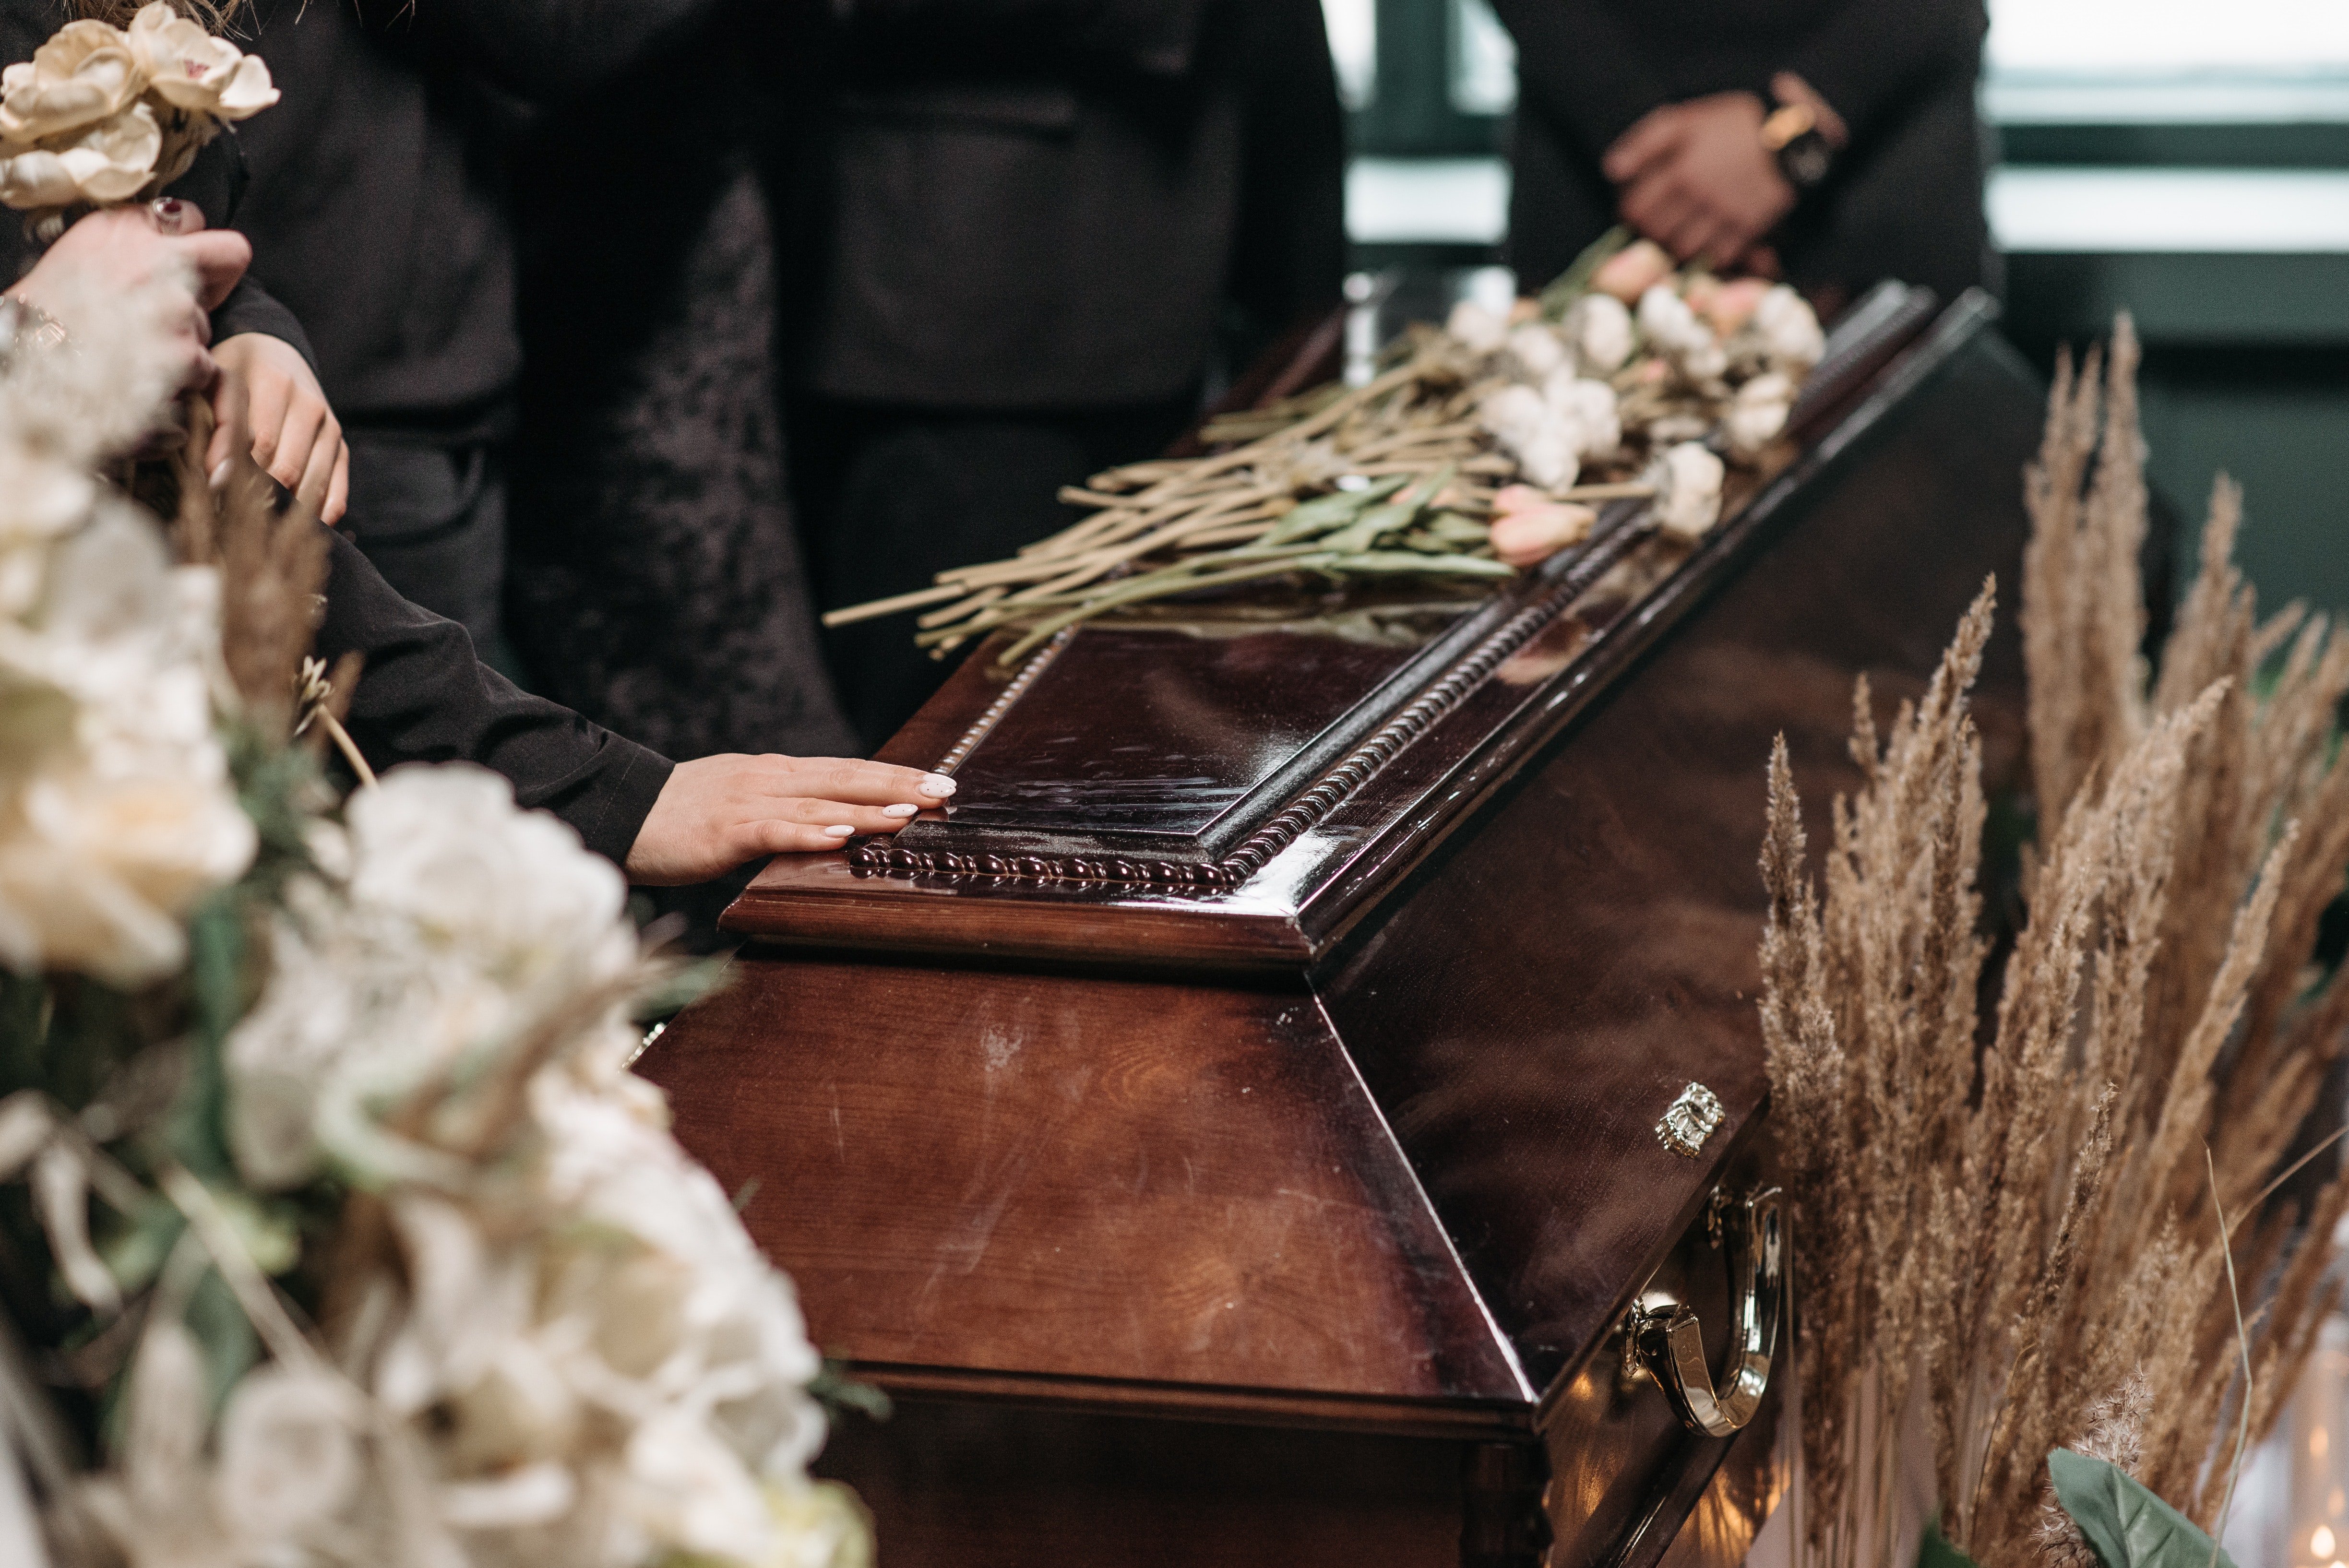 People saying goodbye to a deceased loved one | Photo: Pexels